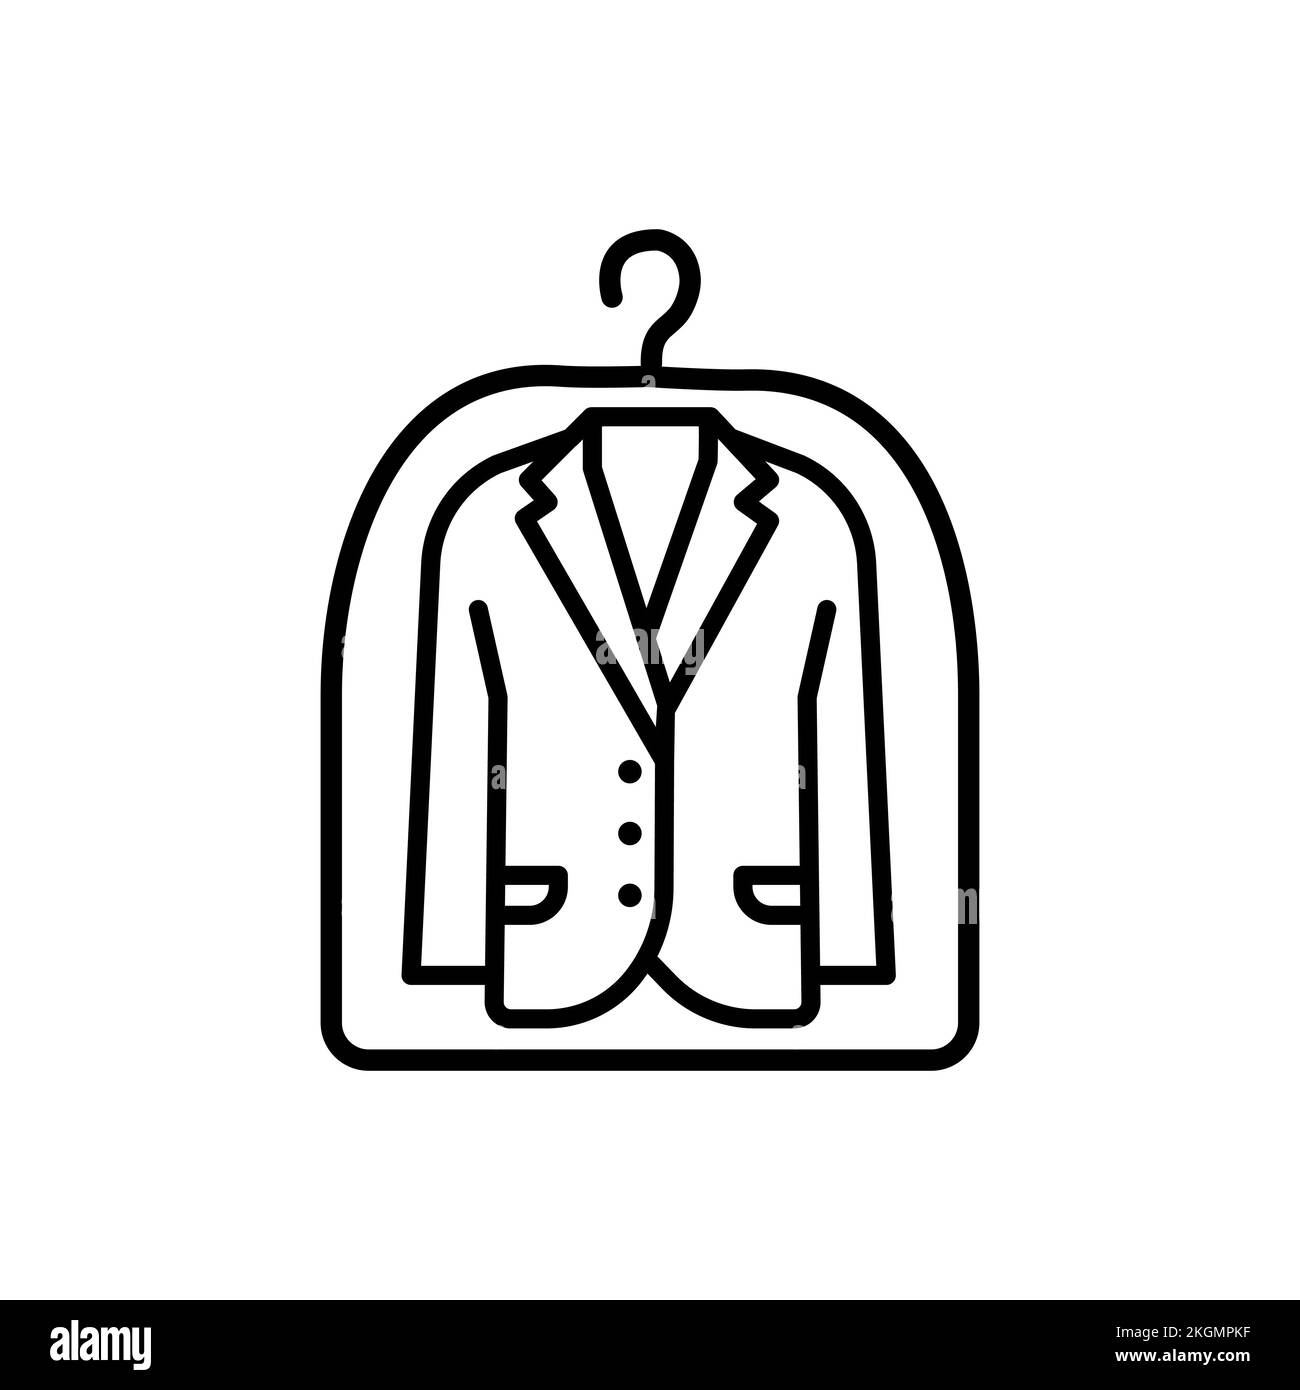 https://c8.alamy.com/comp/2KGMPKF/suit-from-dry-cleaning-thin-line-icon-dust-cover-for-clothing-garment-cover-symbol-of-laundry-modern-vector-illustration-2KGMPKF.jpg